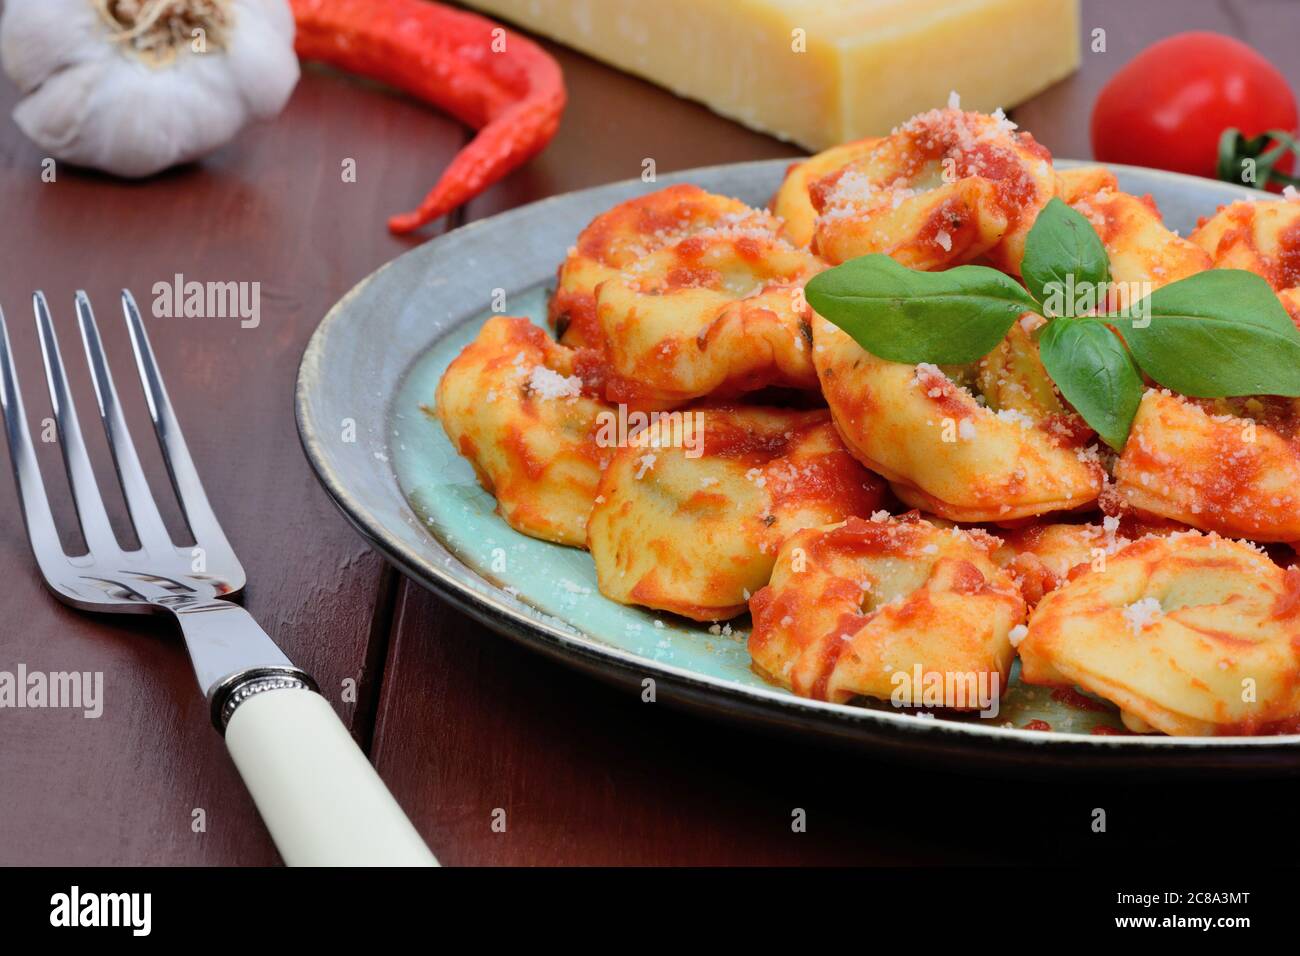 Tortellini with tomatoes sauce and parmesan in a plate on wooden table Stock Photo